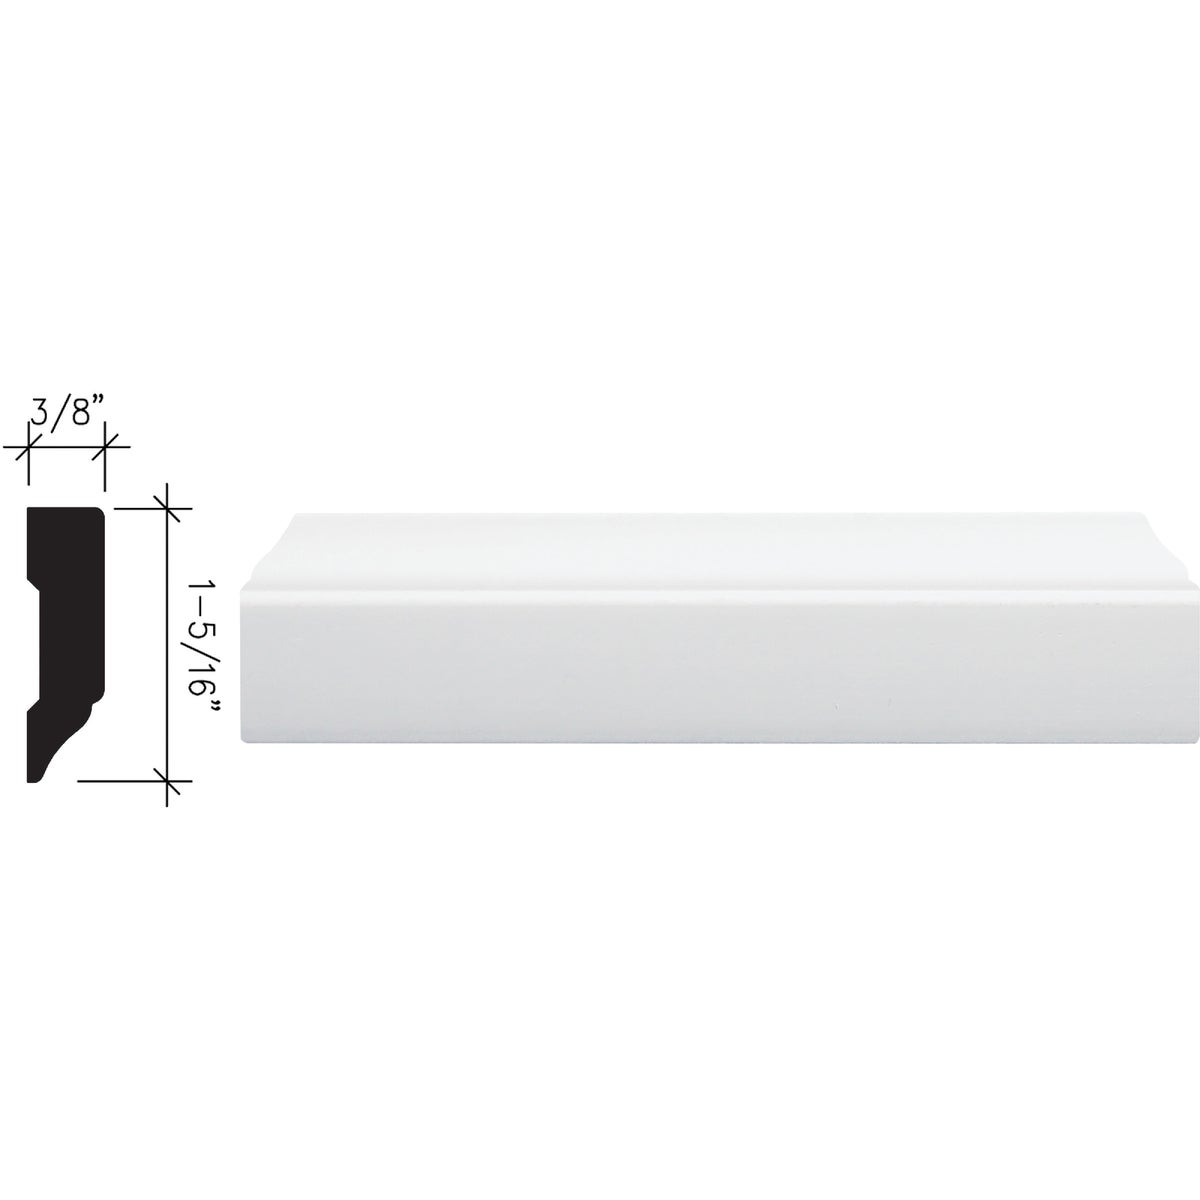 Inteplast Building Products 3/8 In. W. x 1-5/16 In. H. x 7 Ft. L. Crystal White Polystyrene Stop Molding